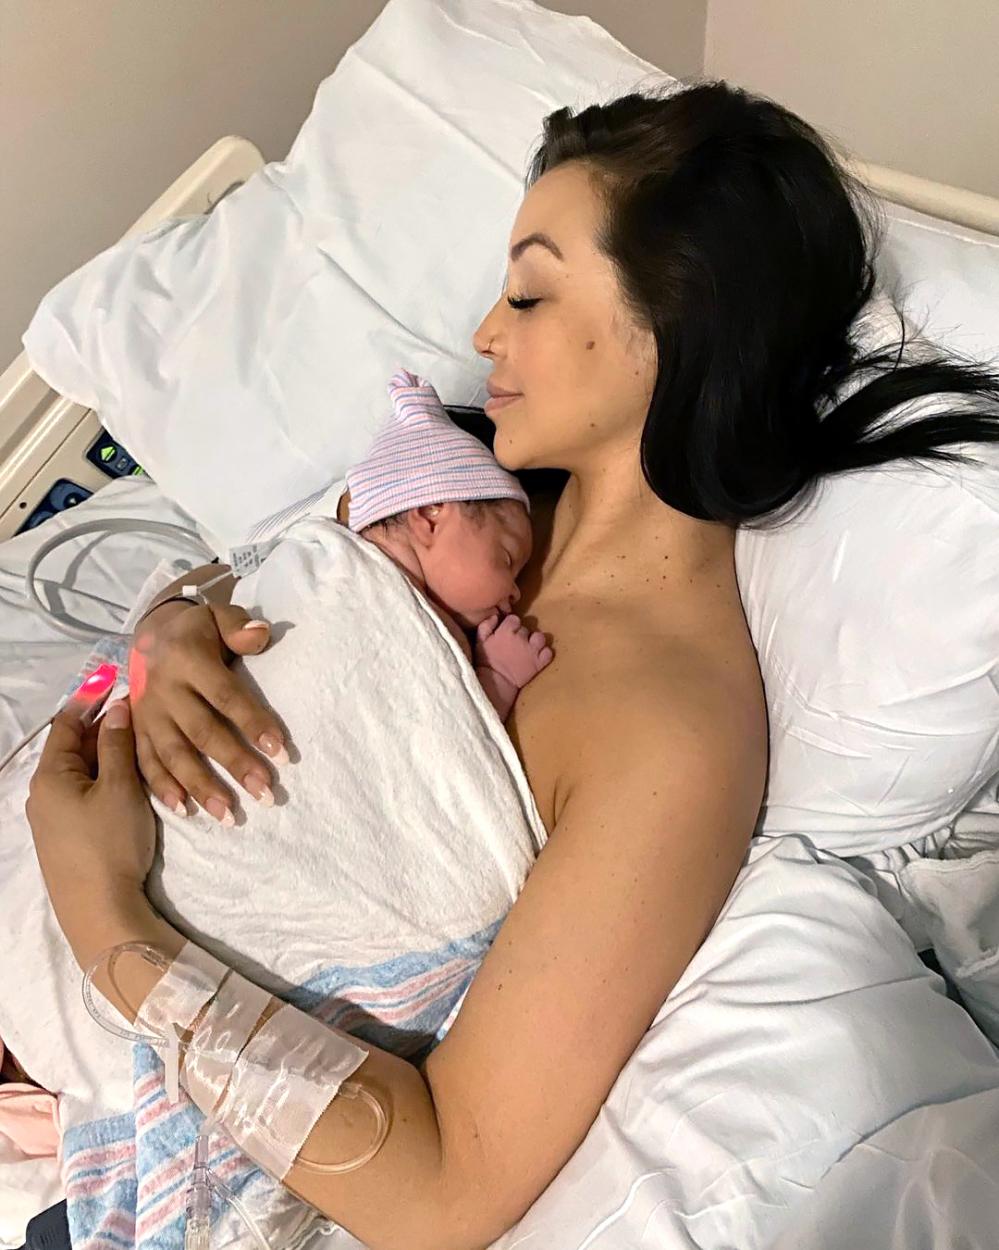 Scheana Shay Sobs Holding Newborn Daughter Summer for 1st Time in Emotional Birth Video